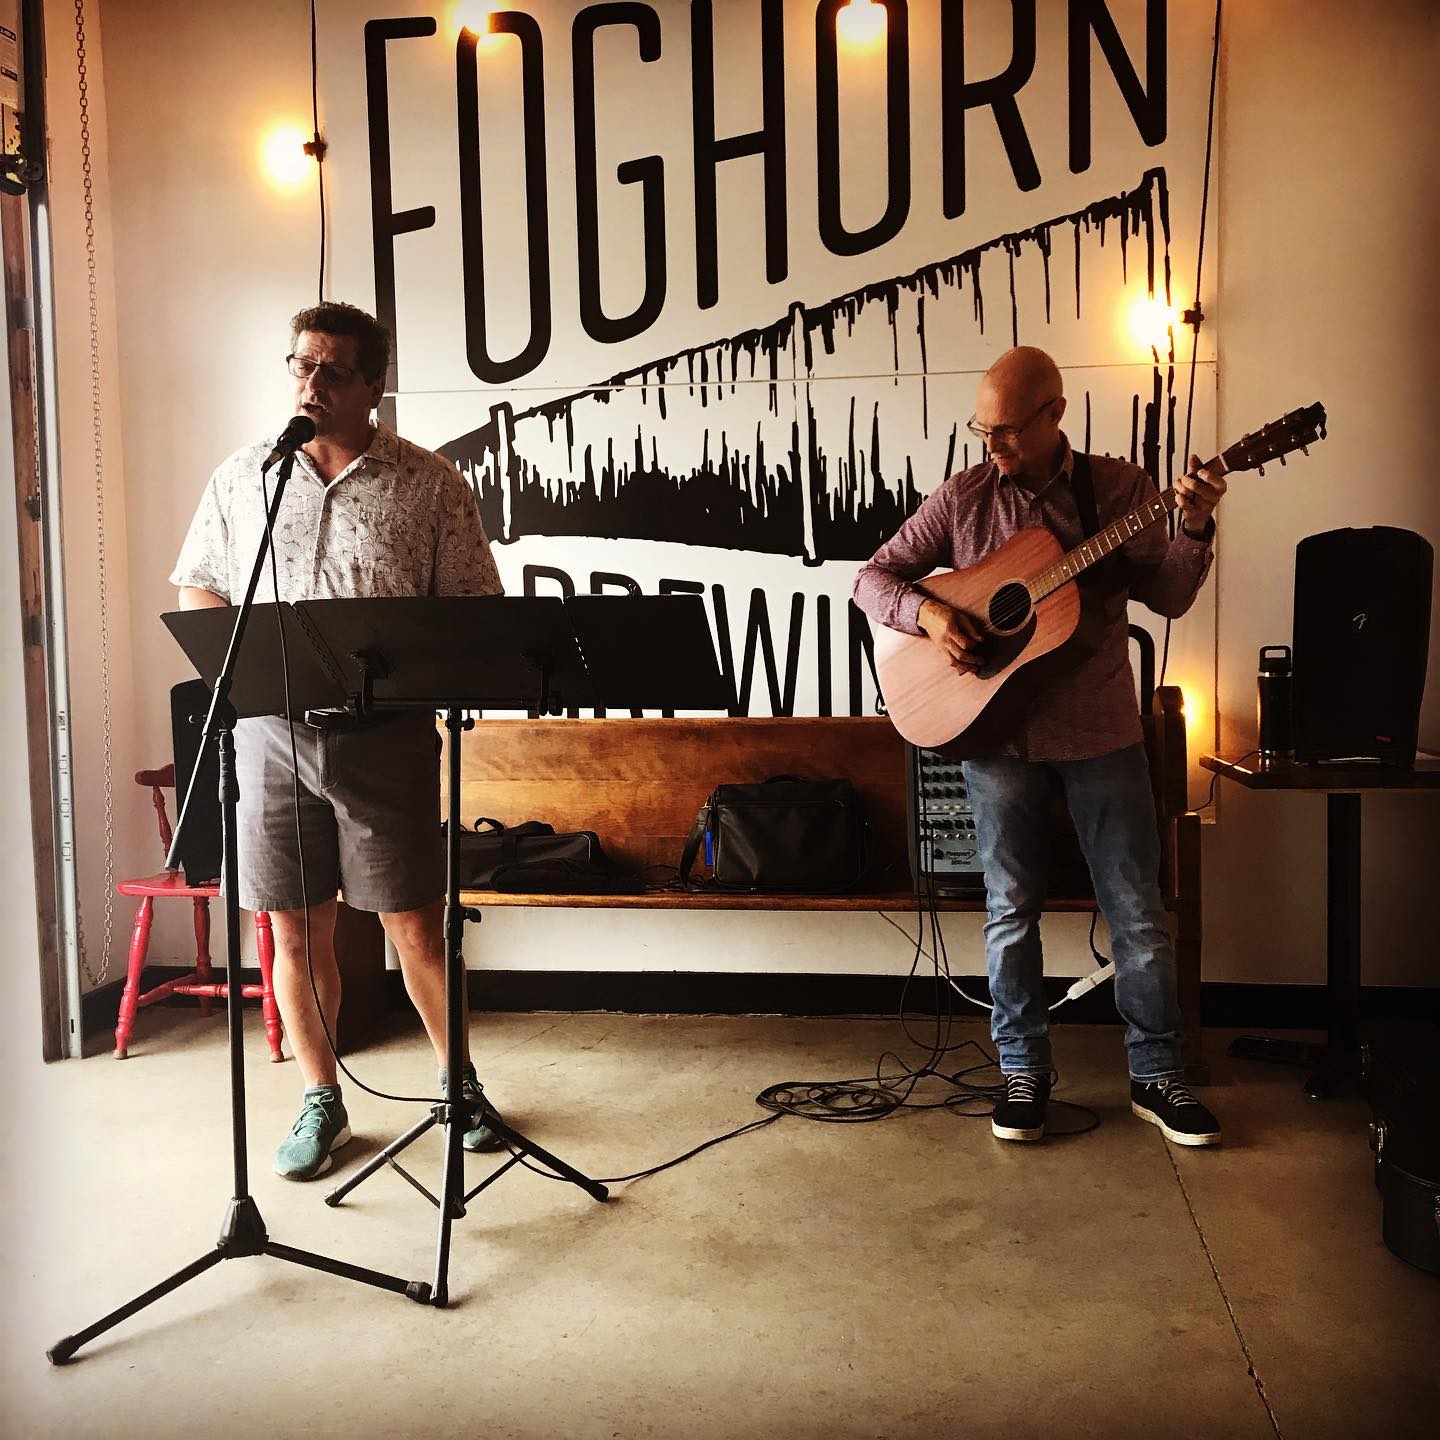 Live show today @drinkfoghorn 
.
.
#livemusic #greatbeer #drinkfoghorn